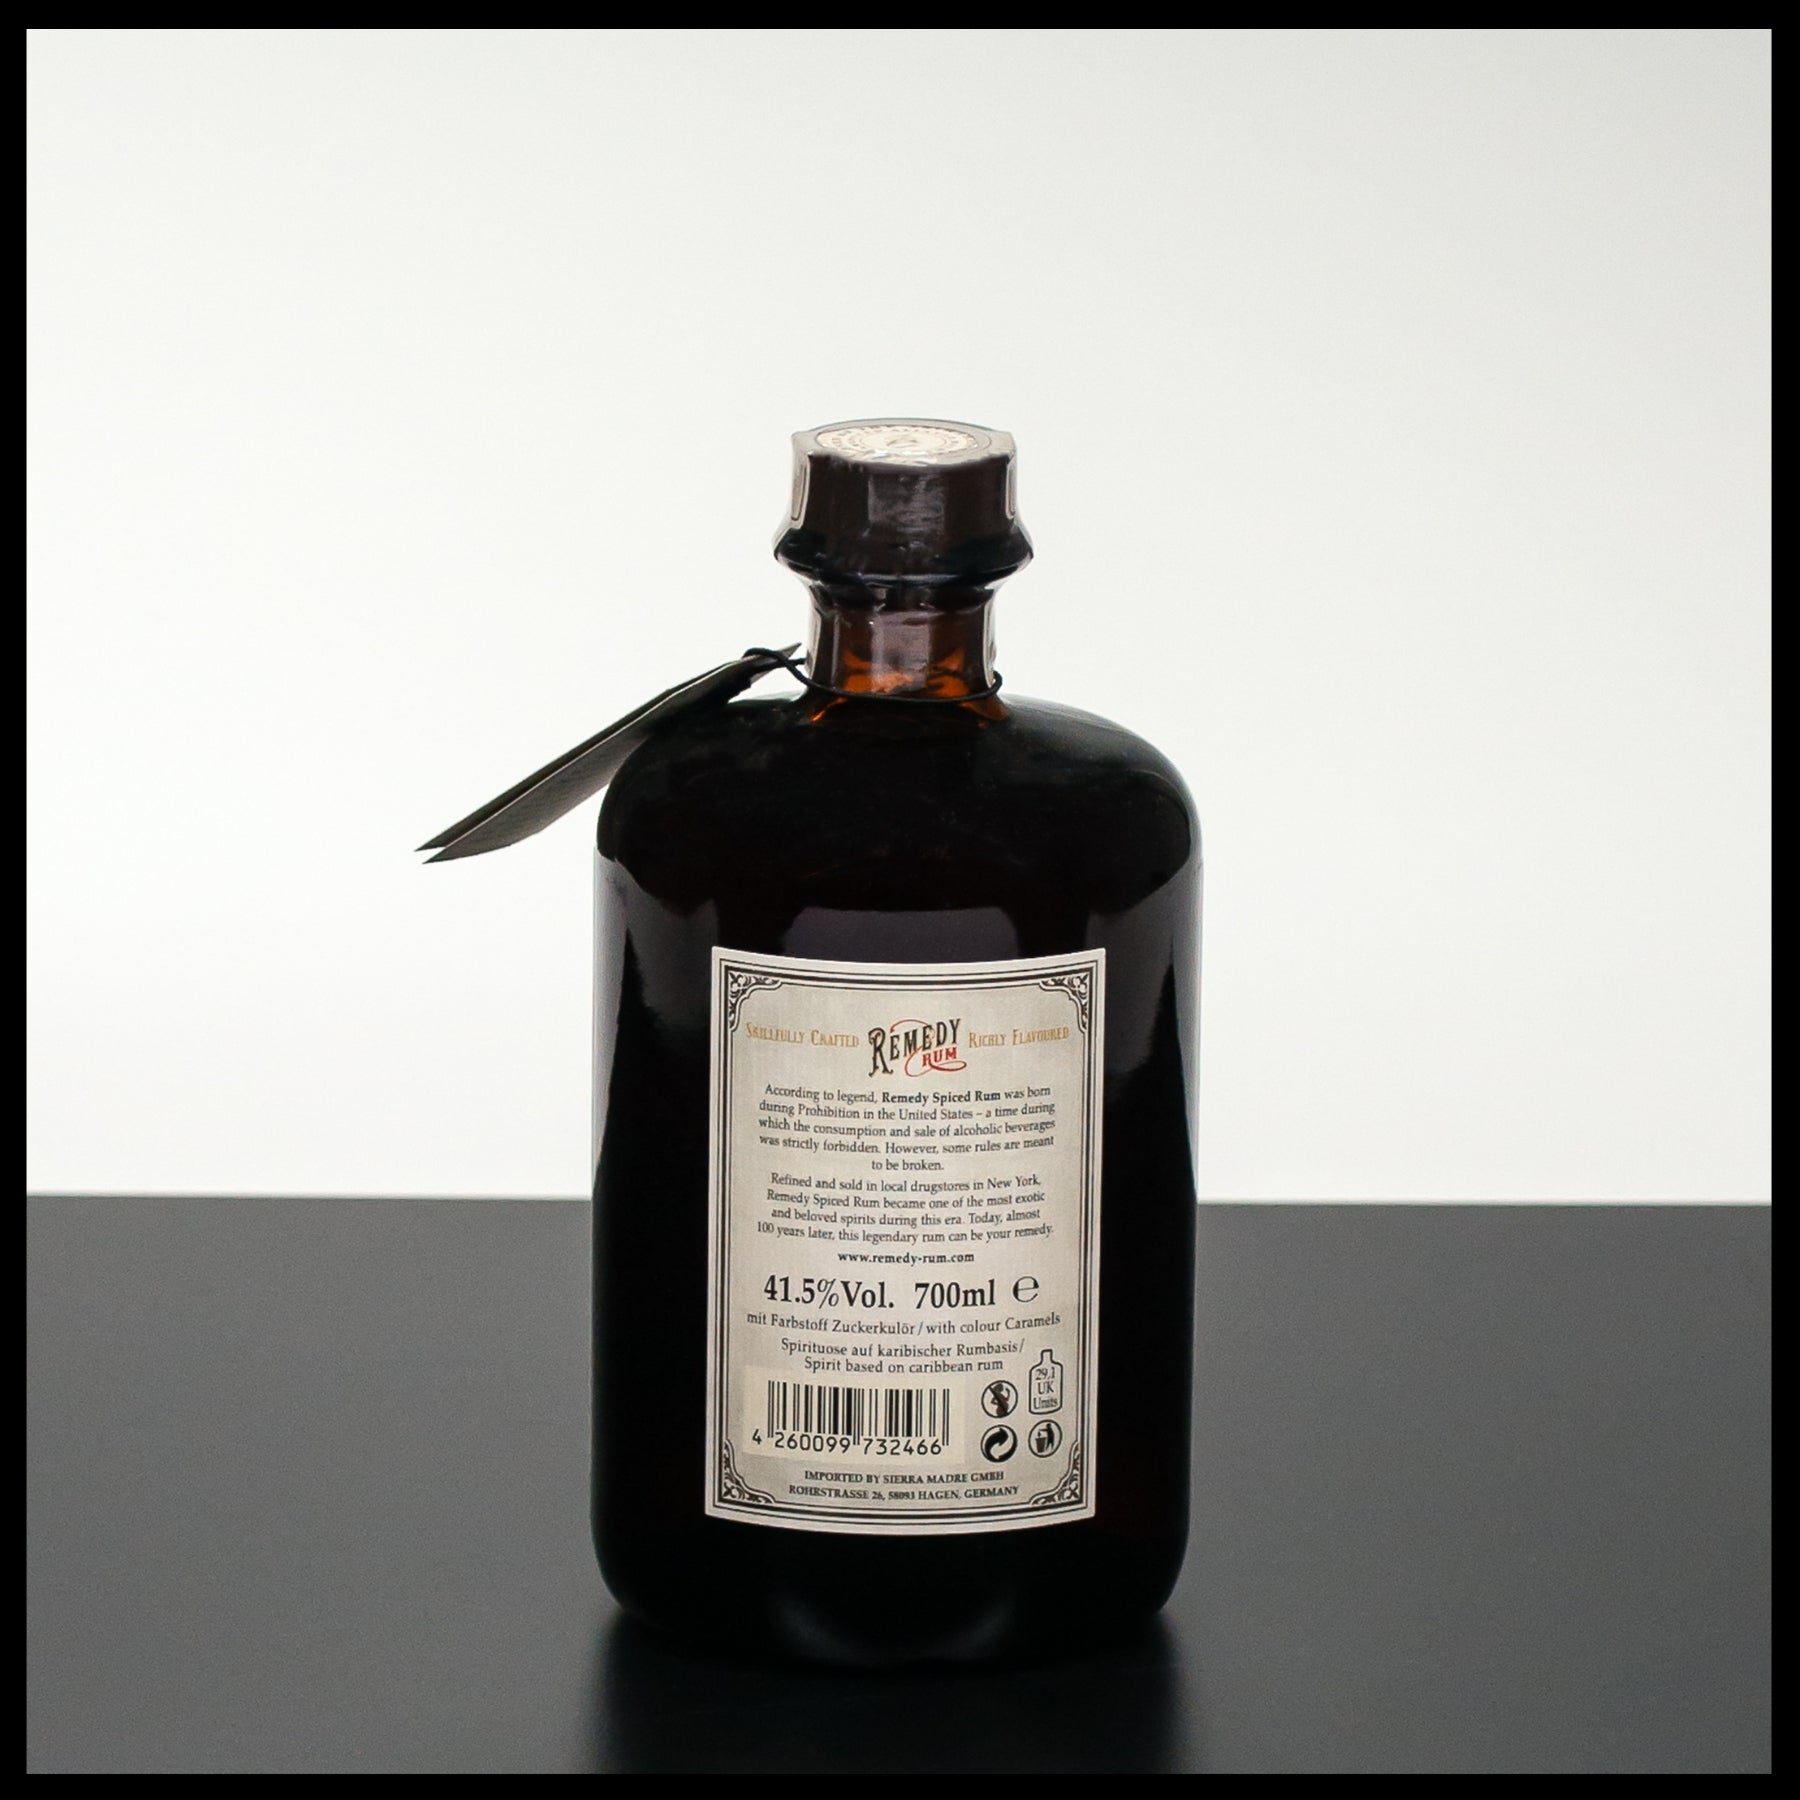 Remedy Spiced Rum 0,7L - Blended Vol. Rum 41,5% 